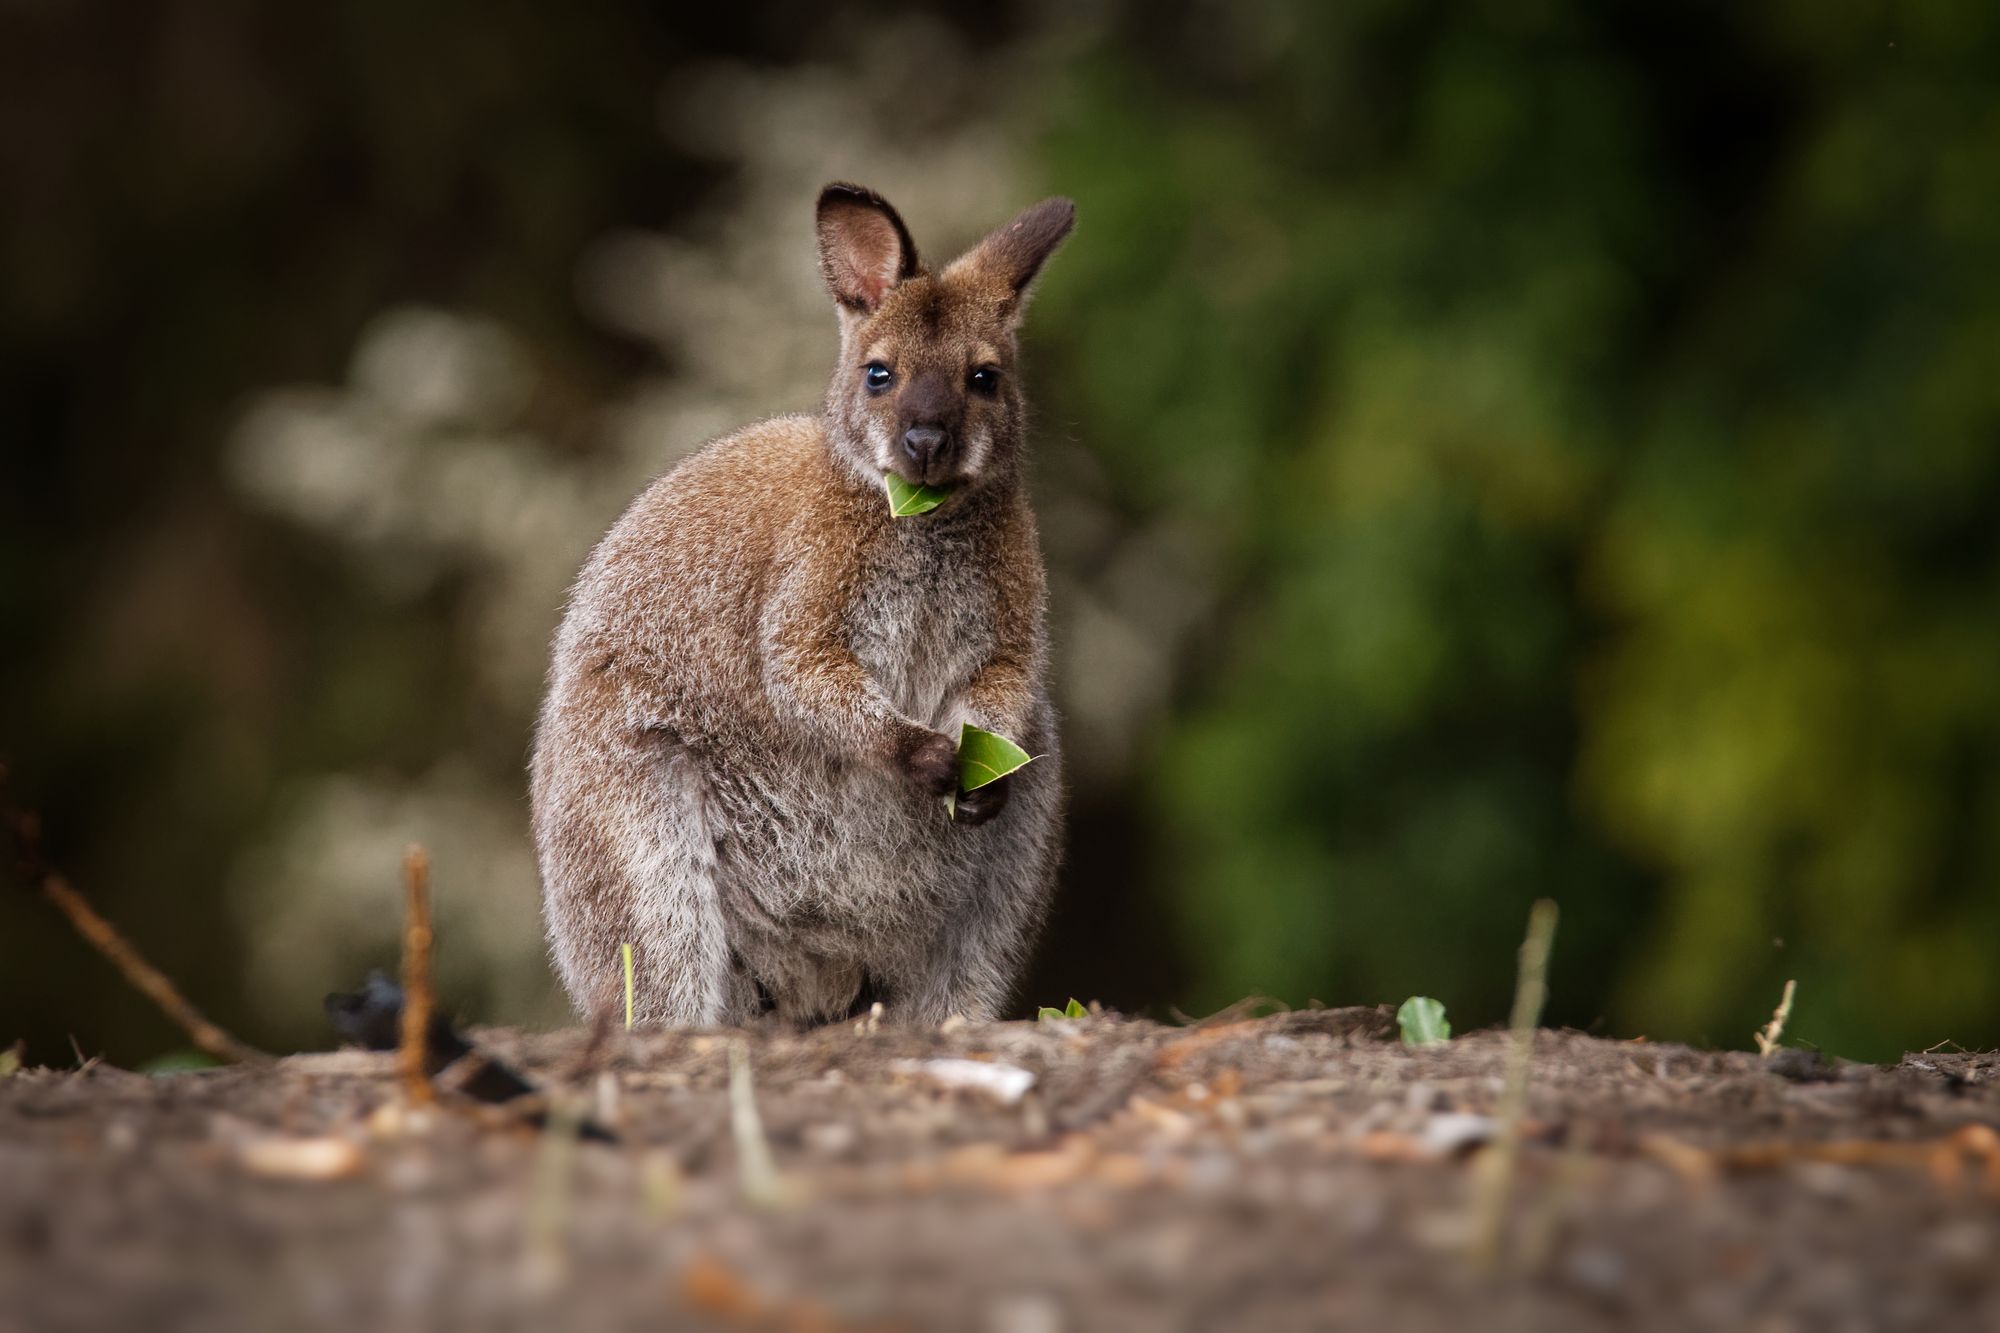 Red-necked wallaby eating a leaf